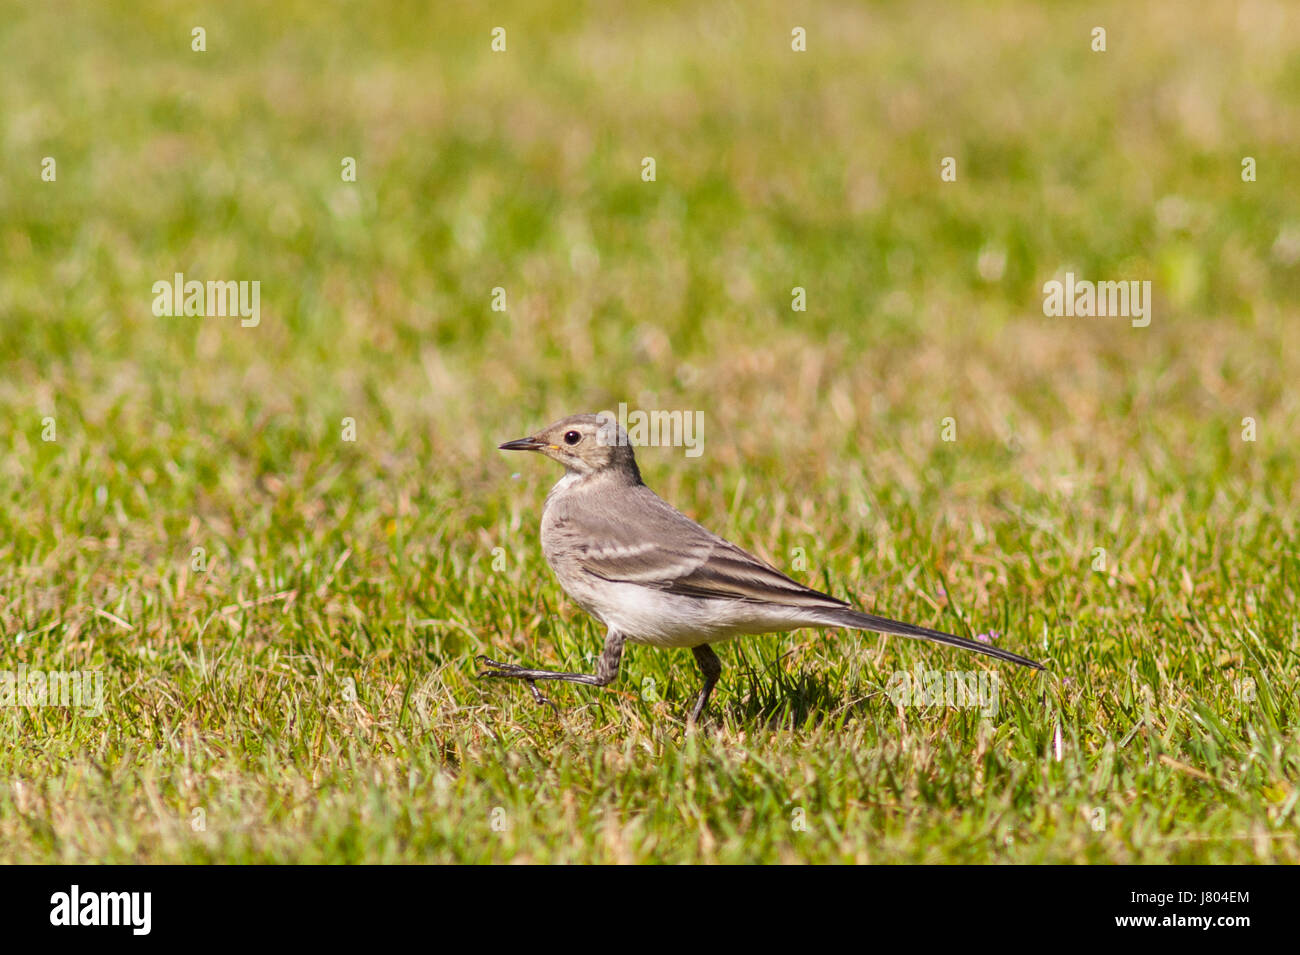 A young Pied wagtail (Motacilla alba) in the Uk Stock Photo